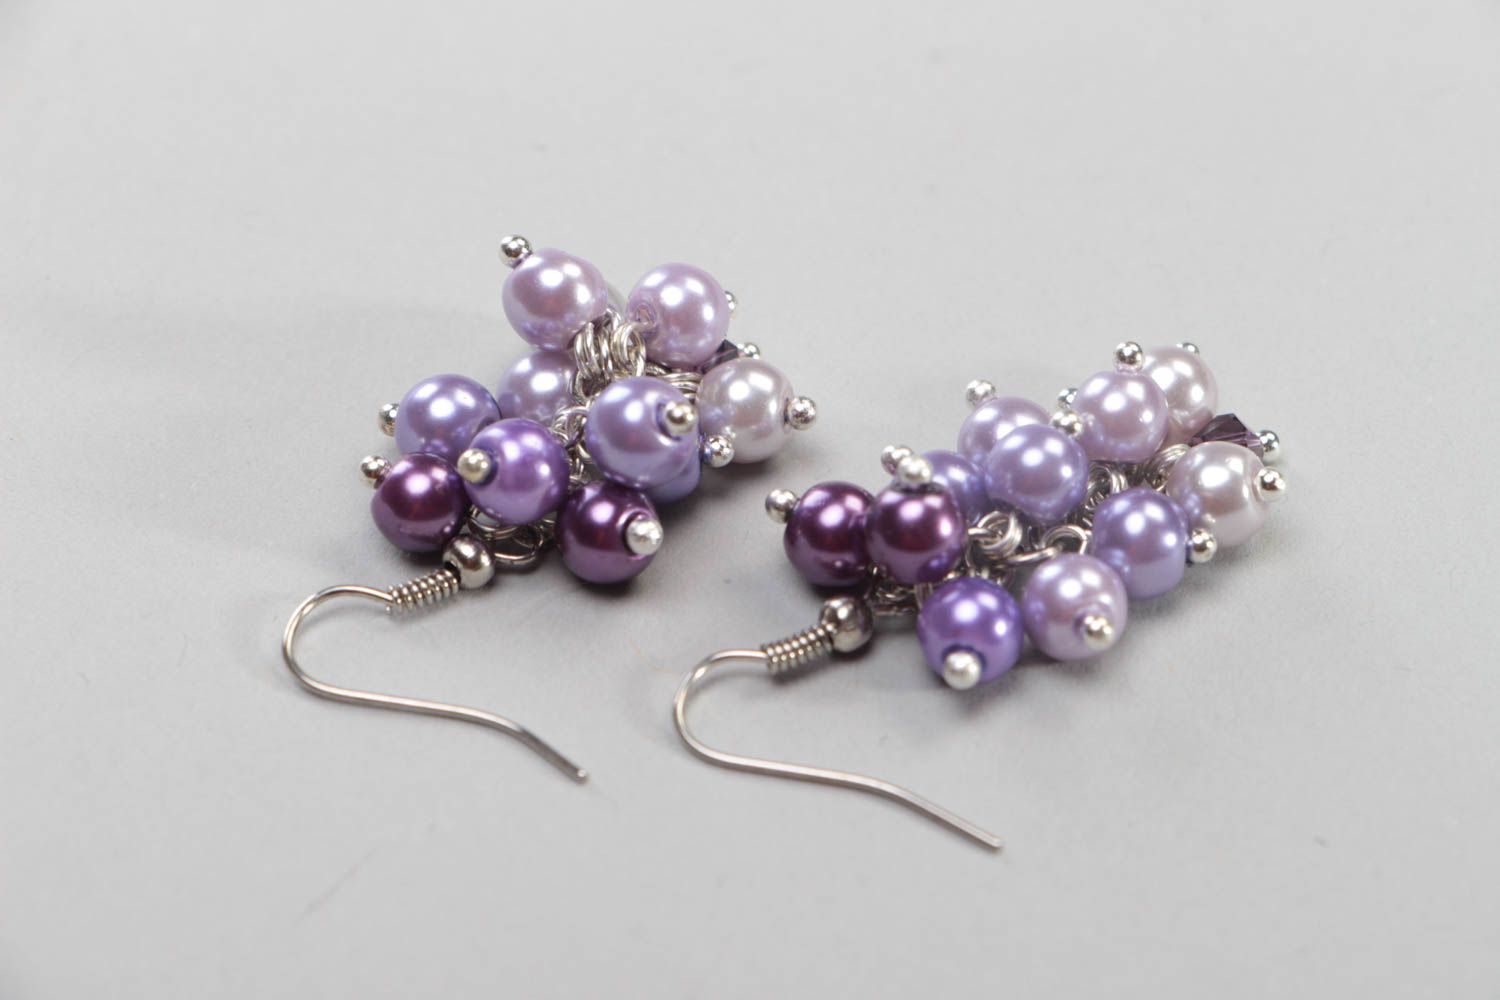 Handmade designer earring accessory made of ceramic pearls lilac jewelry photo 4